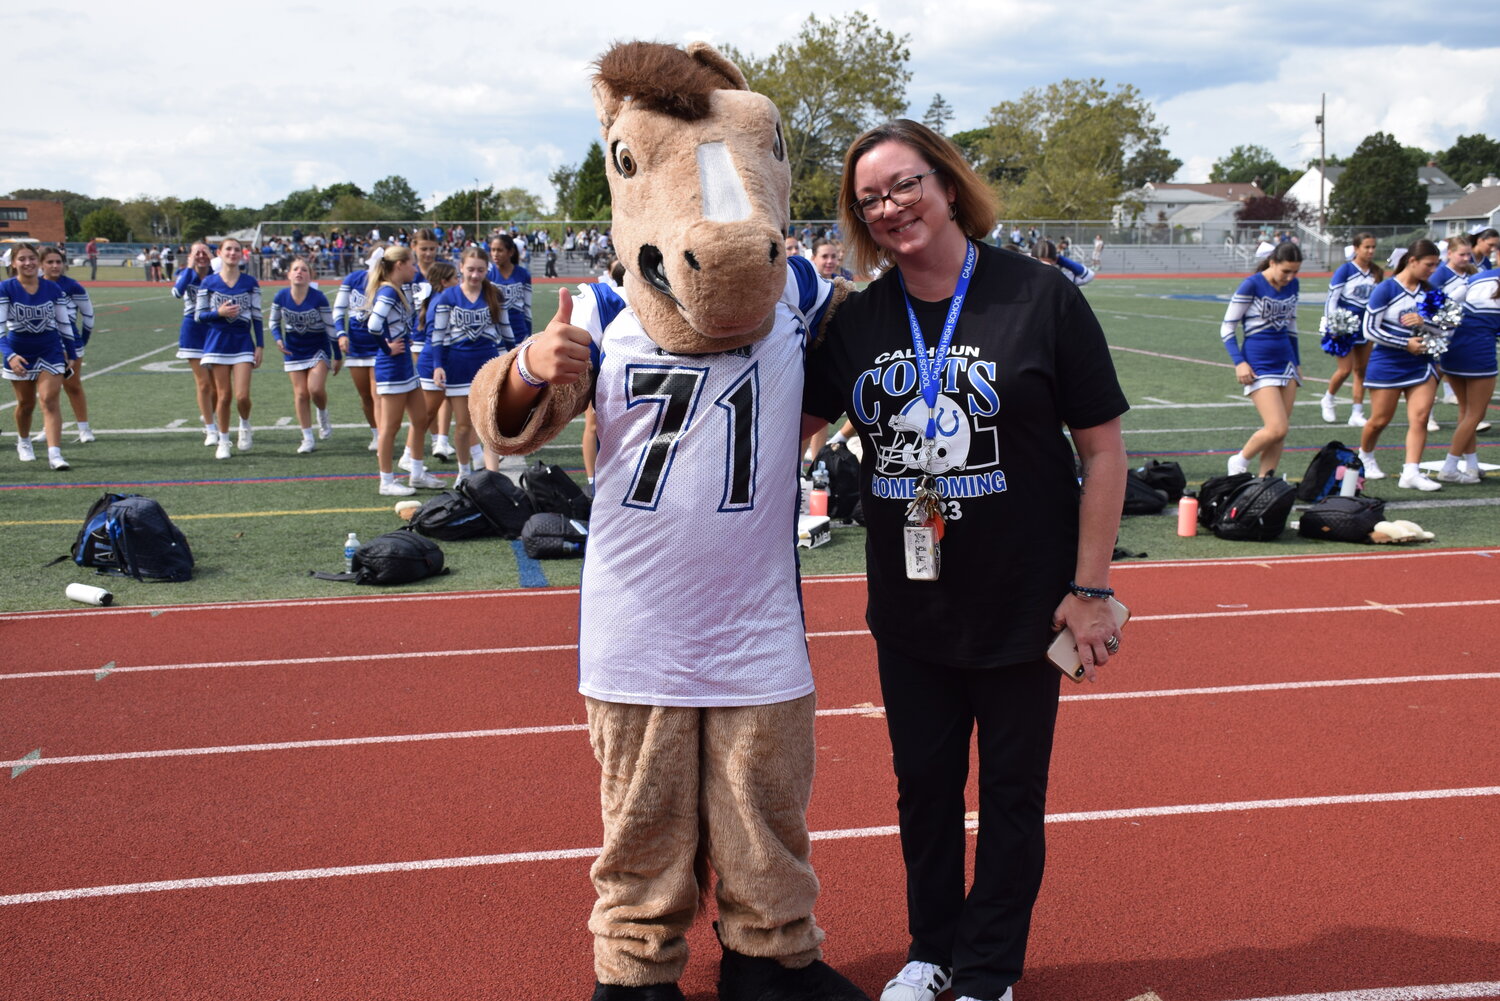 Charlie the Colt, also known as Jordan Ovalle, the school’s mascot, with Principal Nicole Hollings.